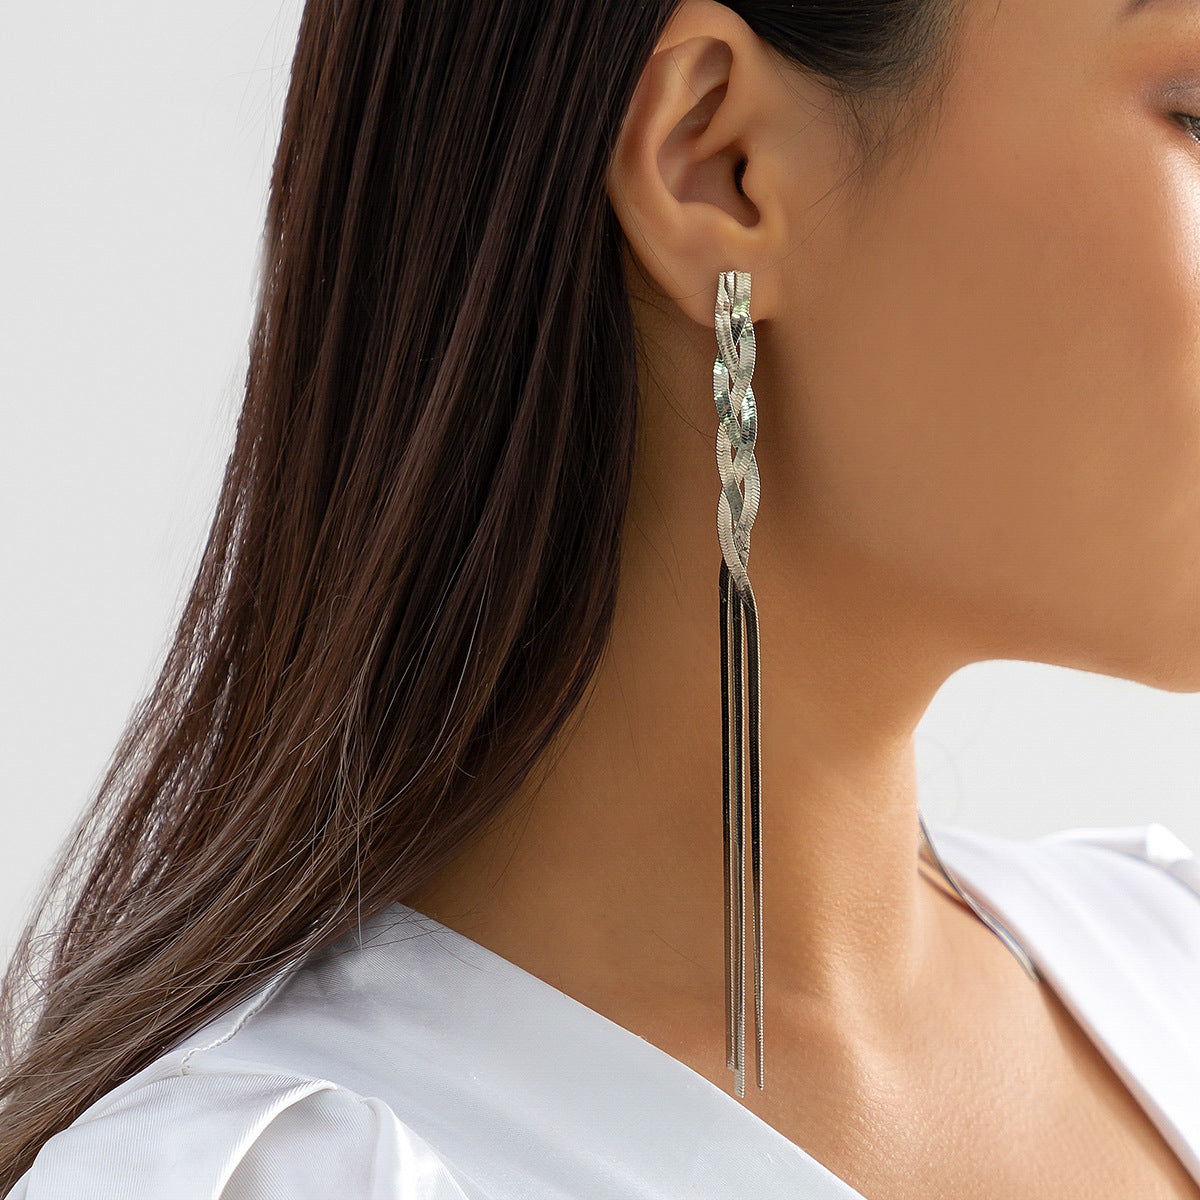 Fashionable Silver-colored Metal Chain Earring